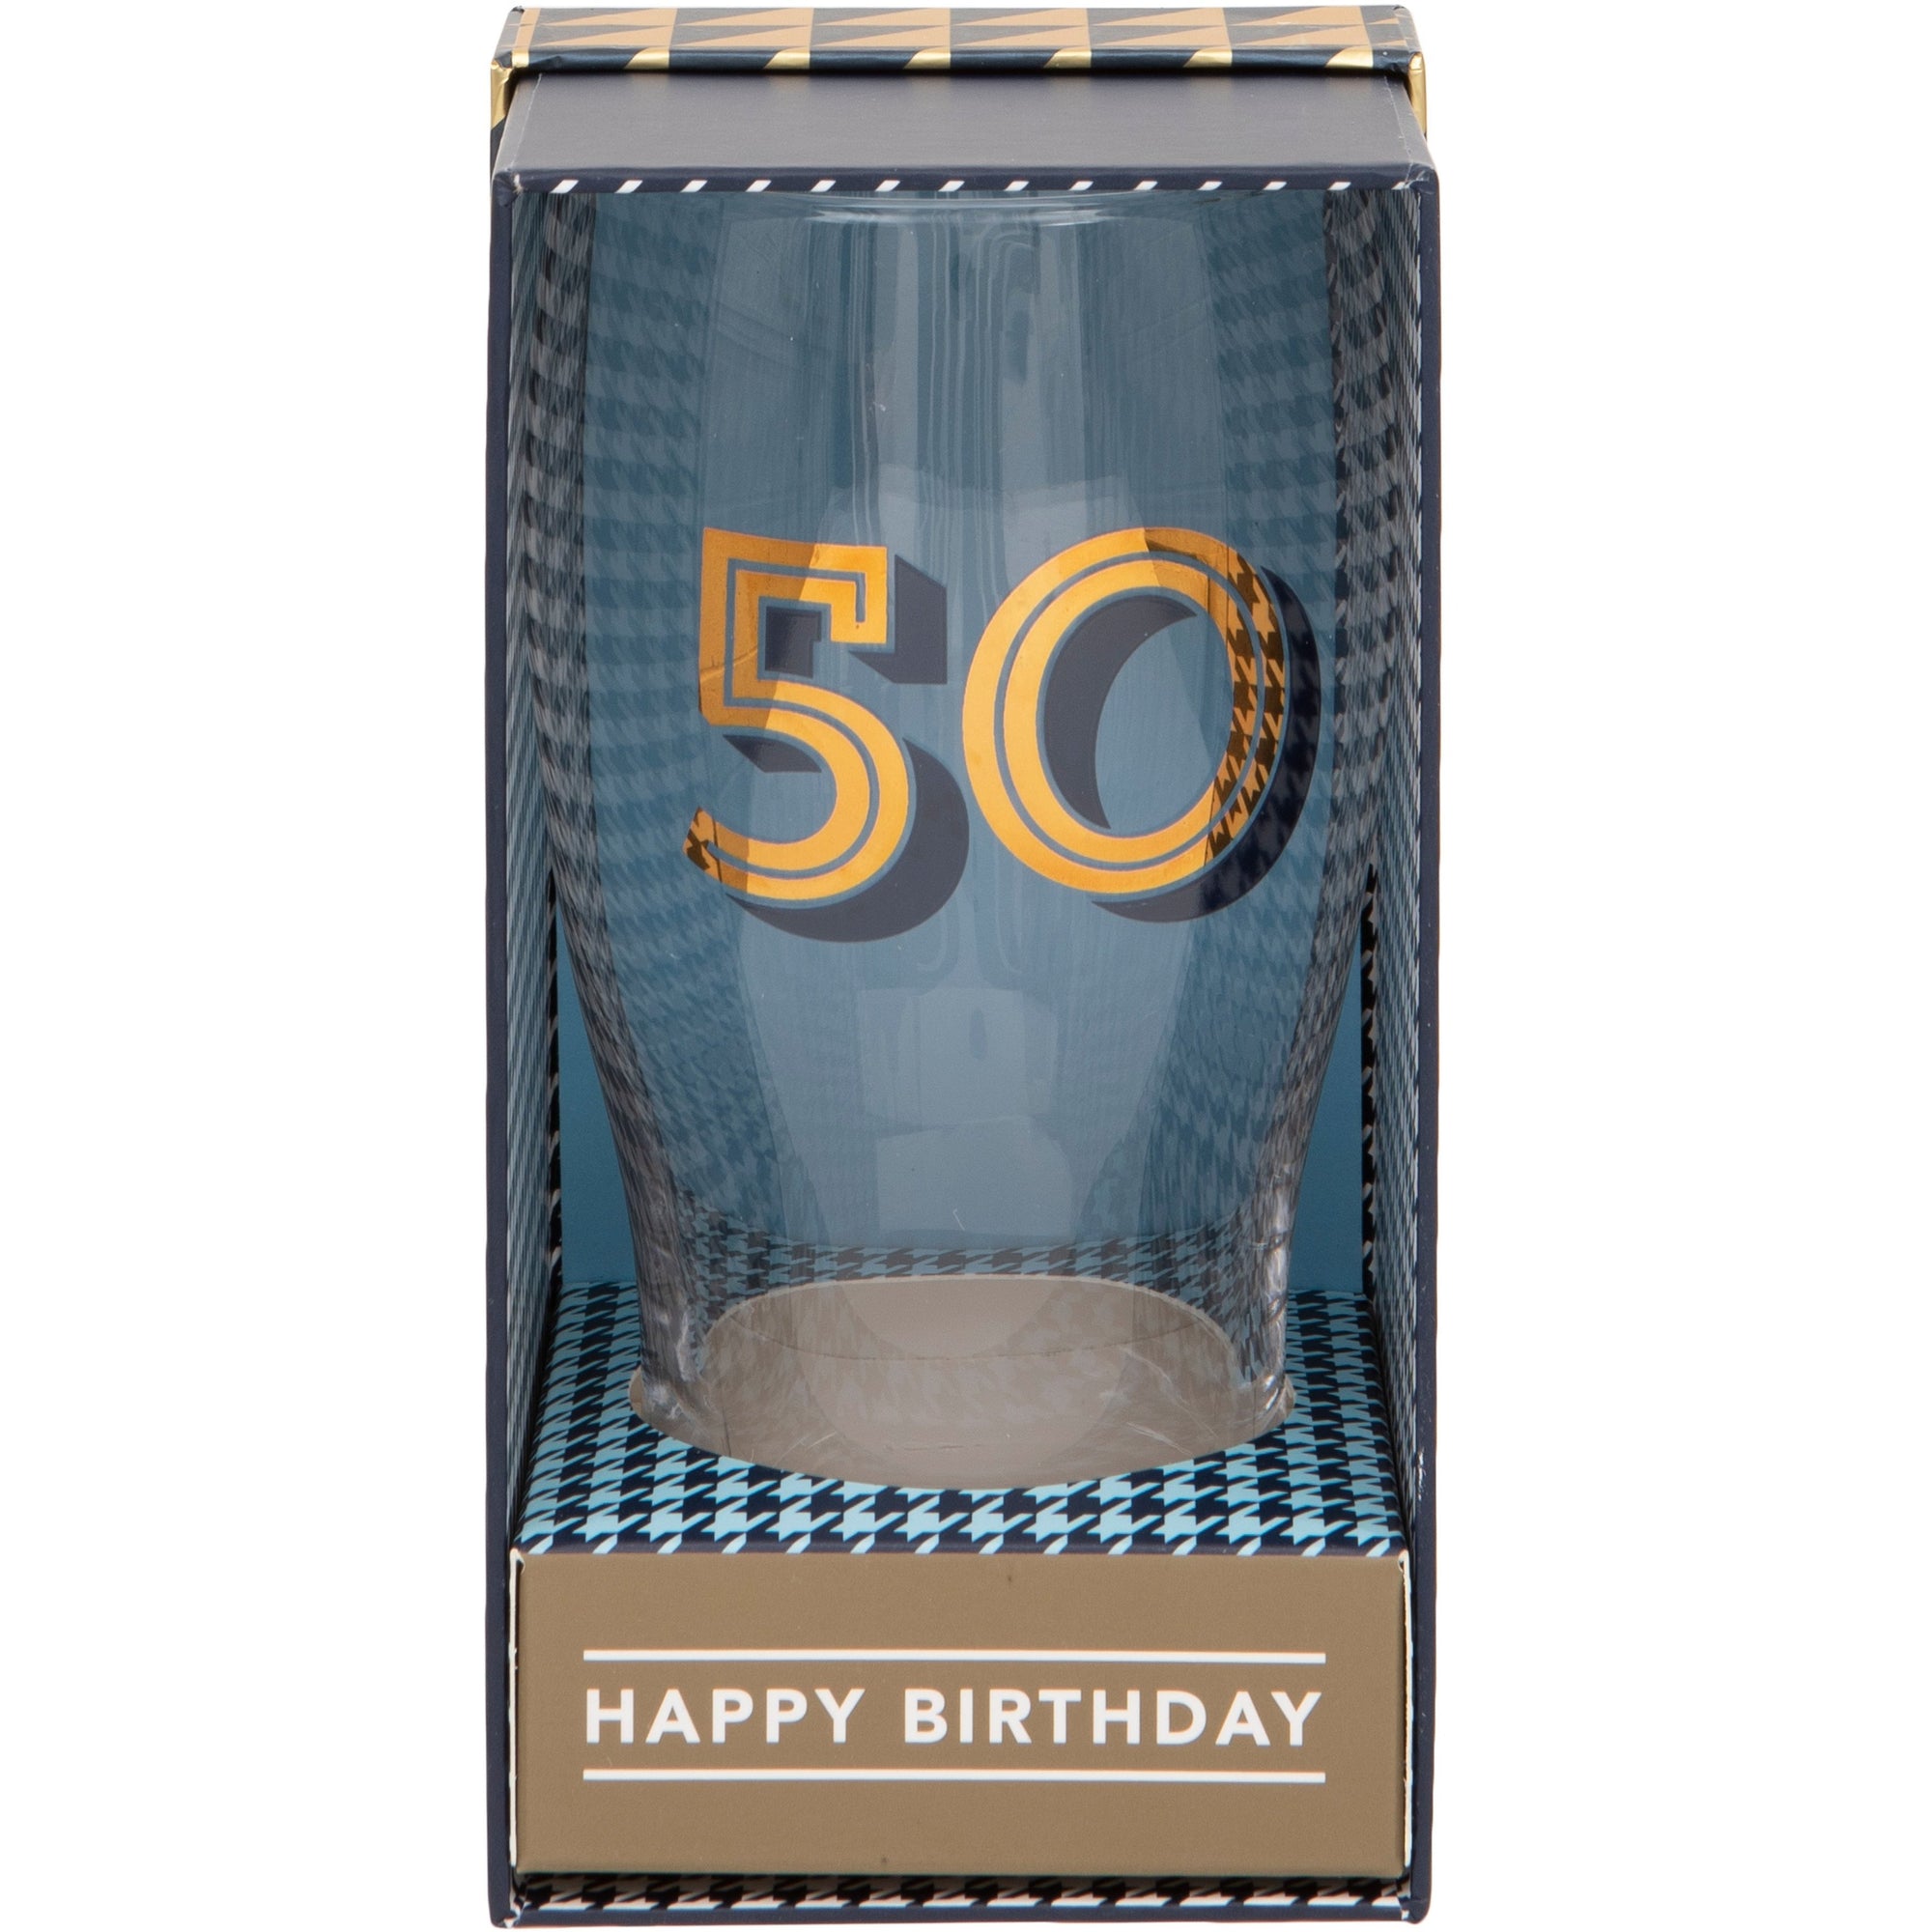 Gold Collection 50th Birthday Beer Pint Glass